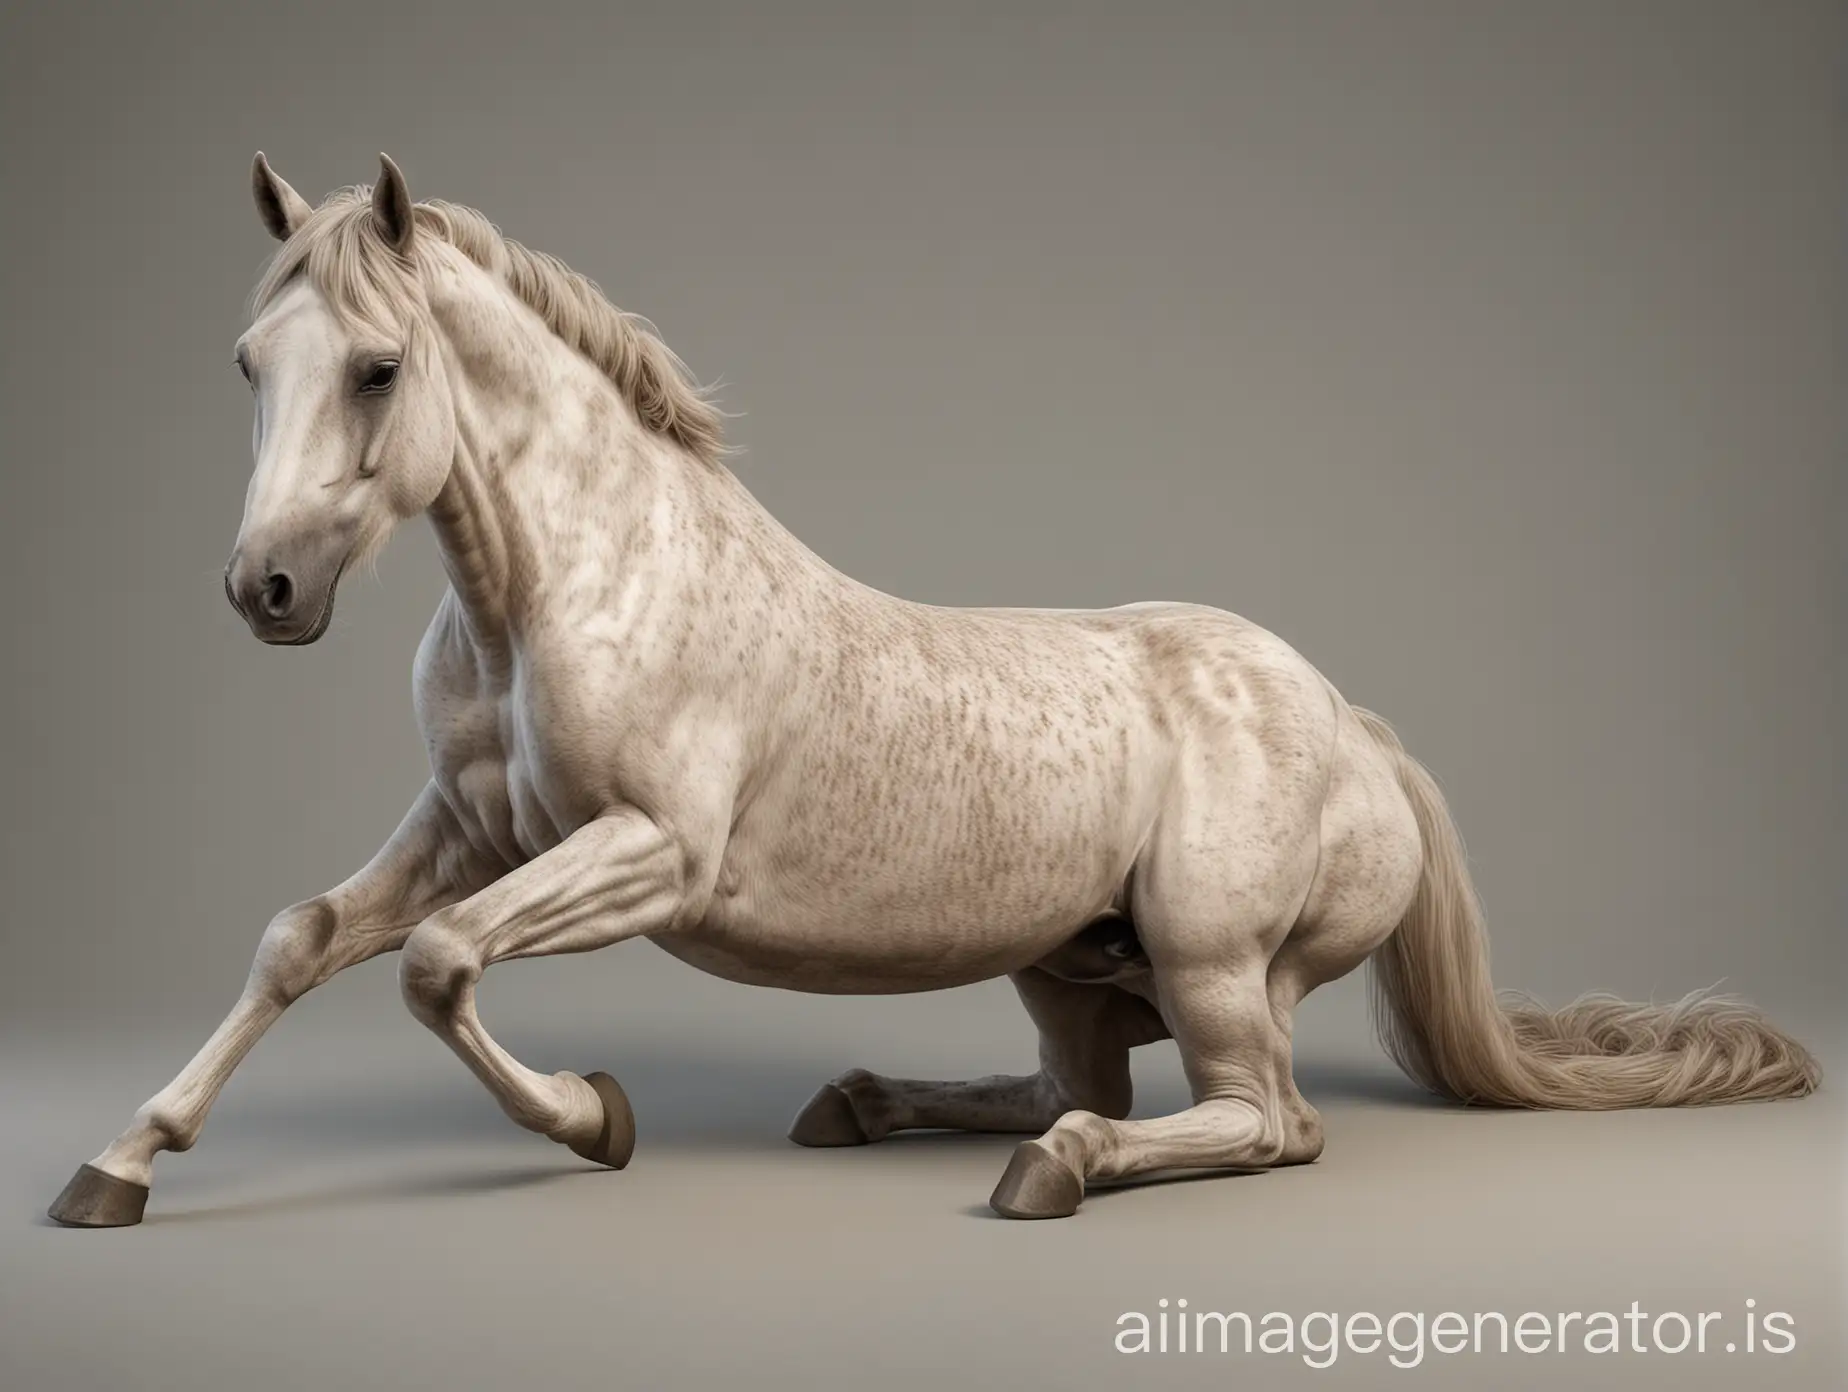 Realistic-Horse-Lying-Down-on-Neutral-Background